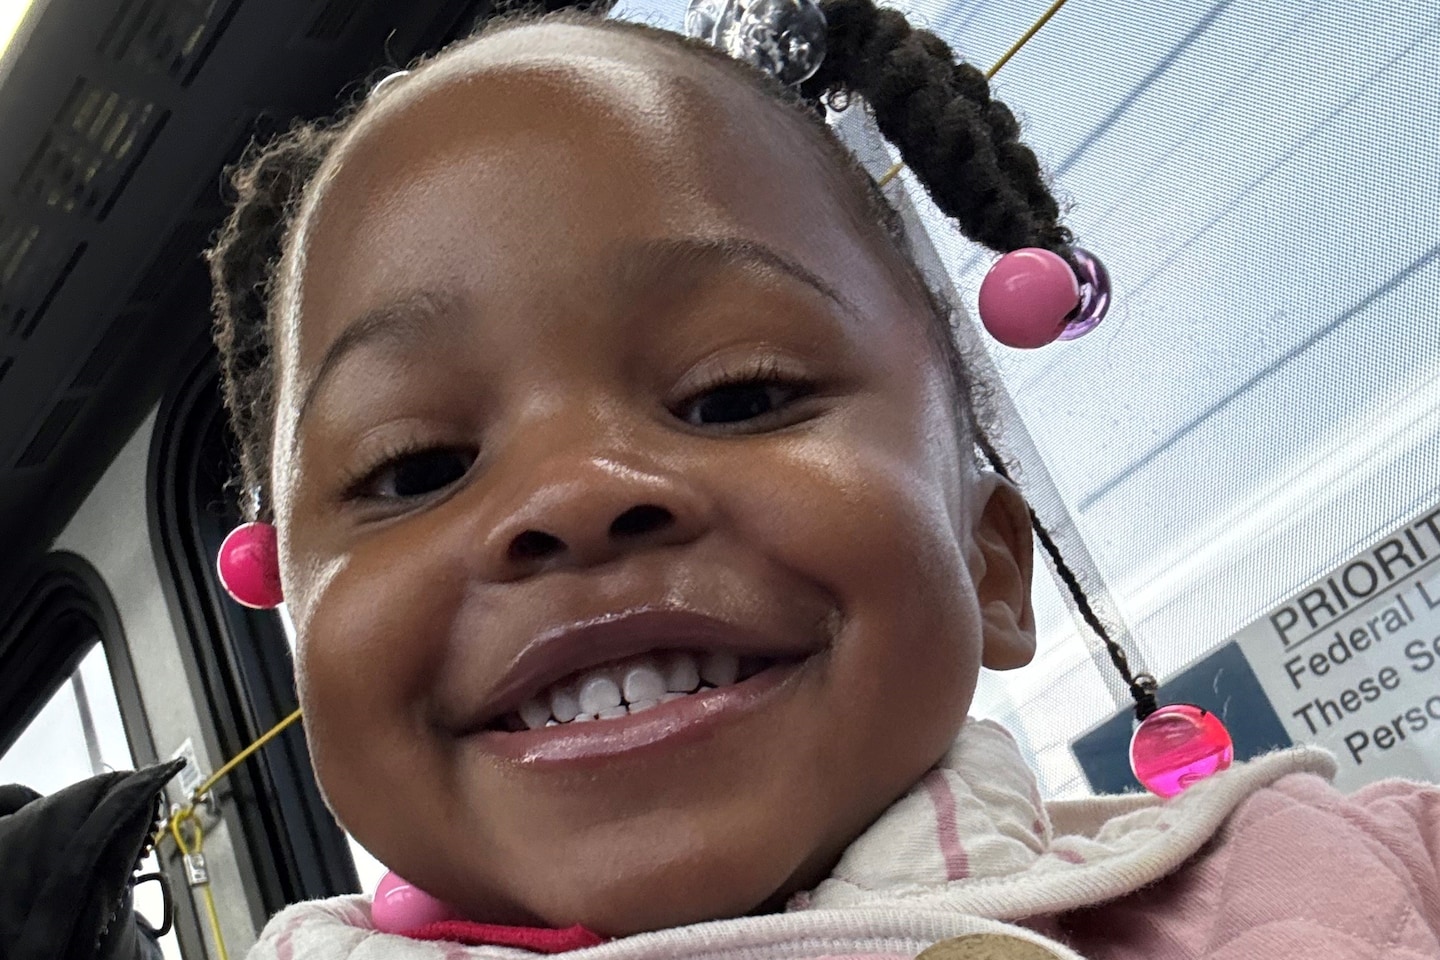 Ty’ah Settles, 3-year-old killed in D.C., shooting loved french fries, painting